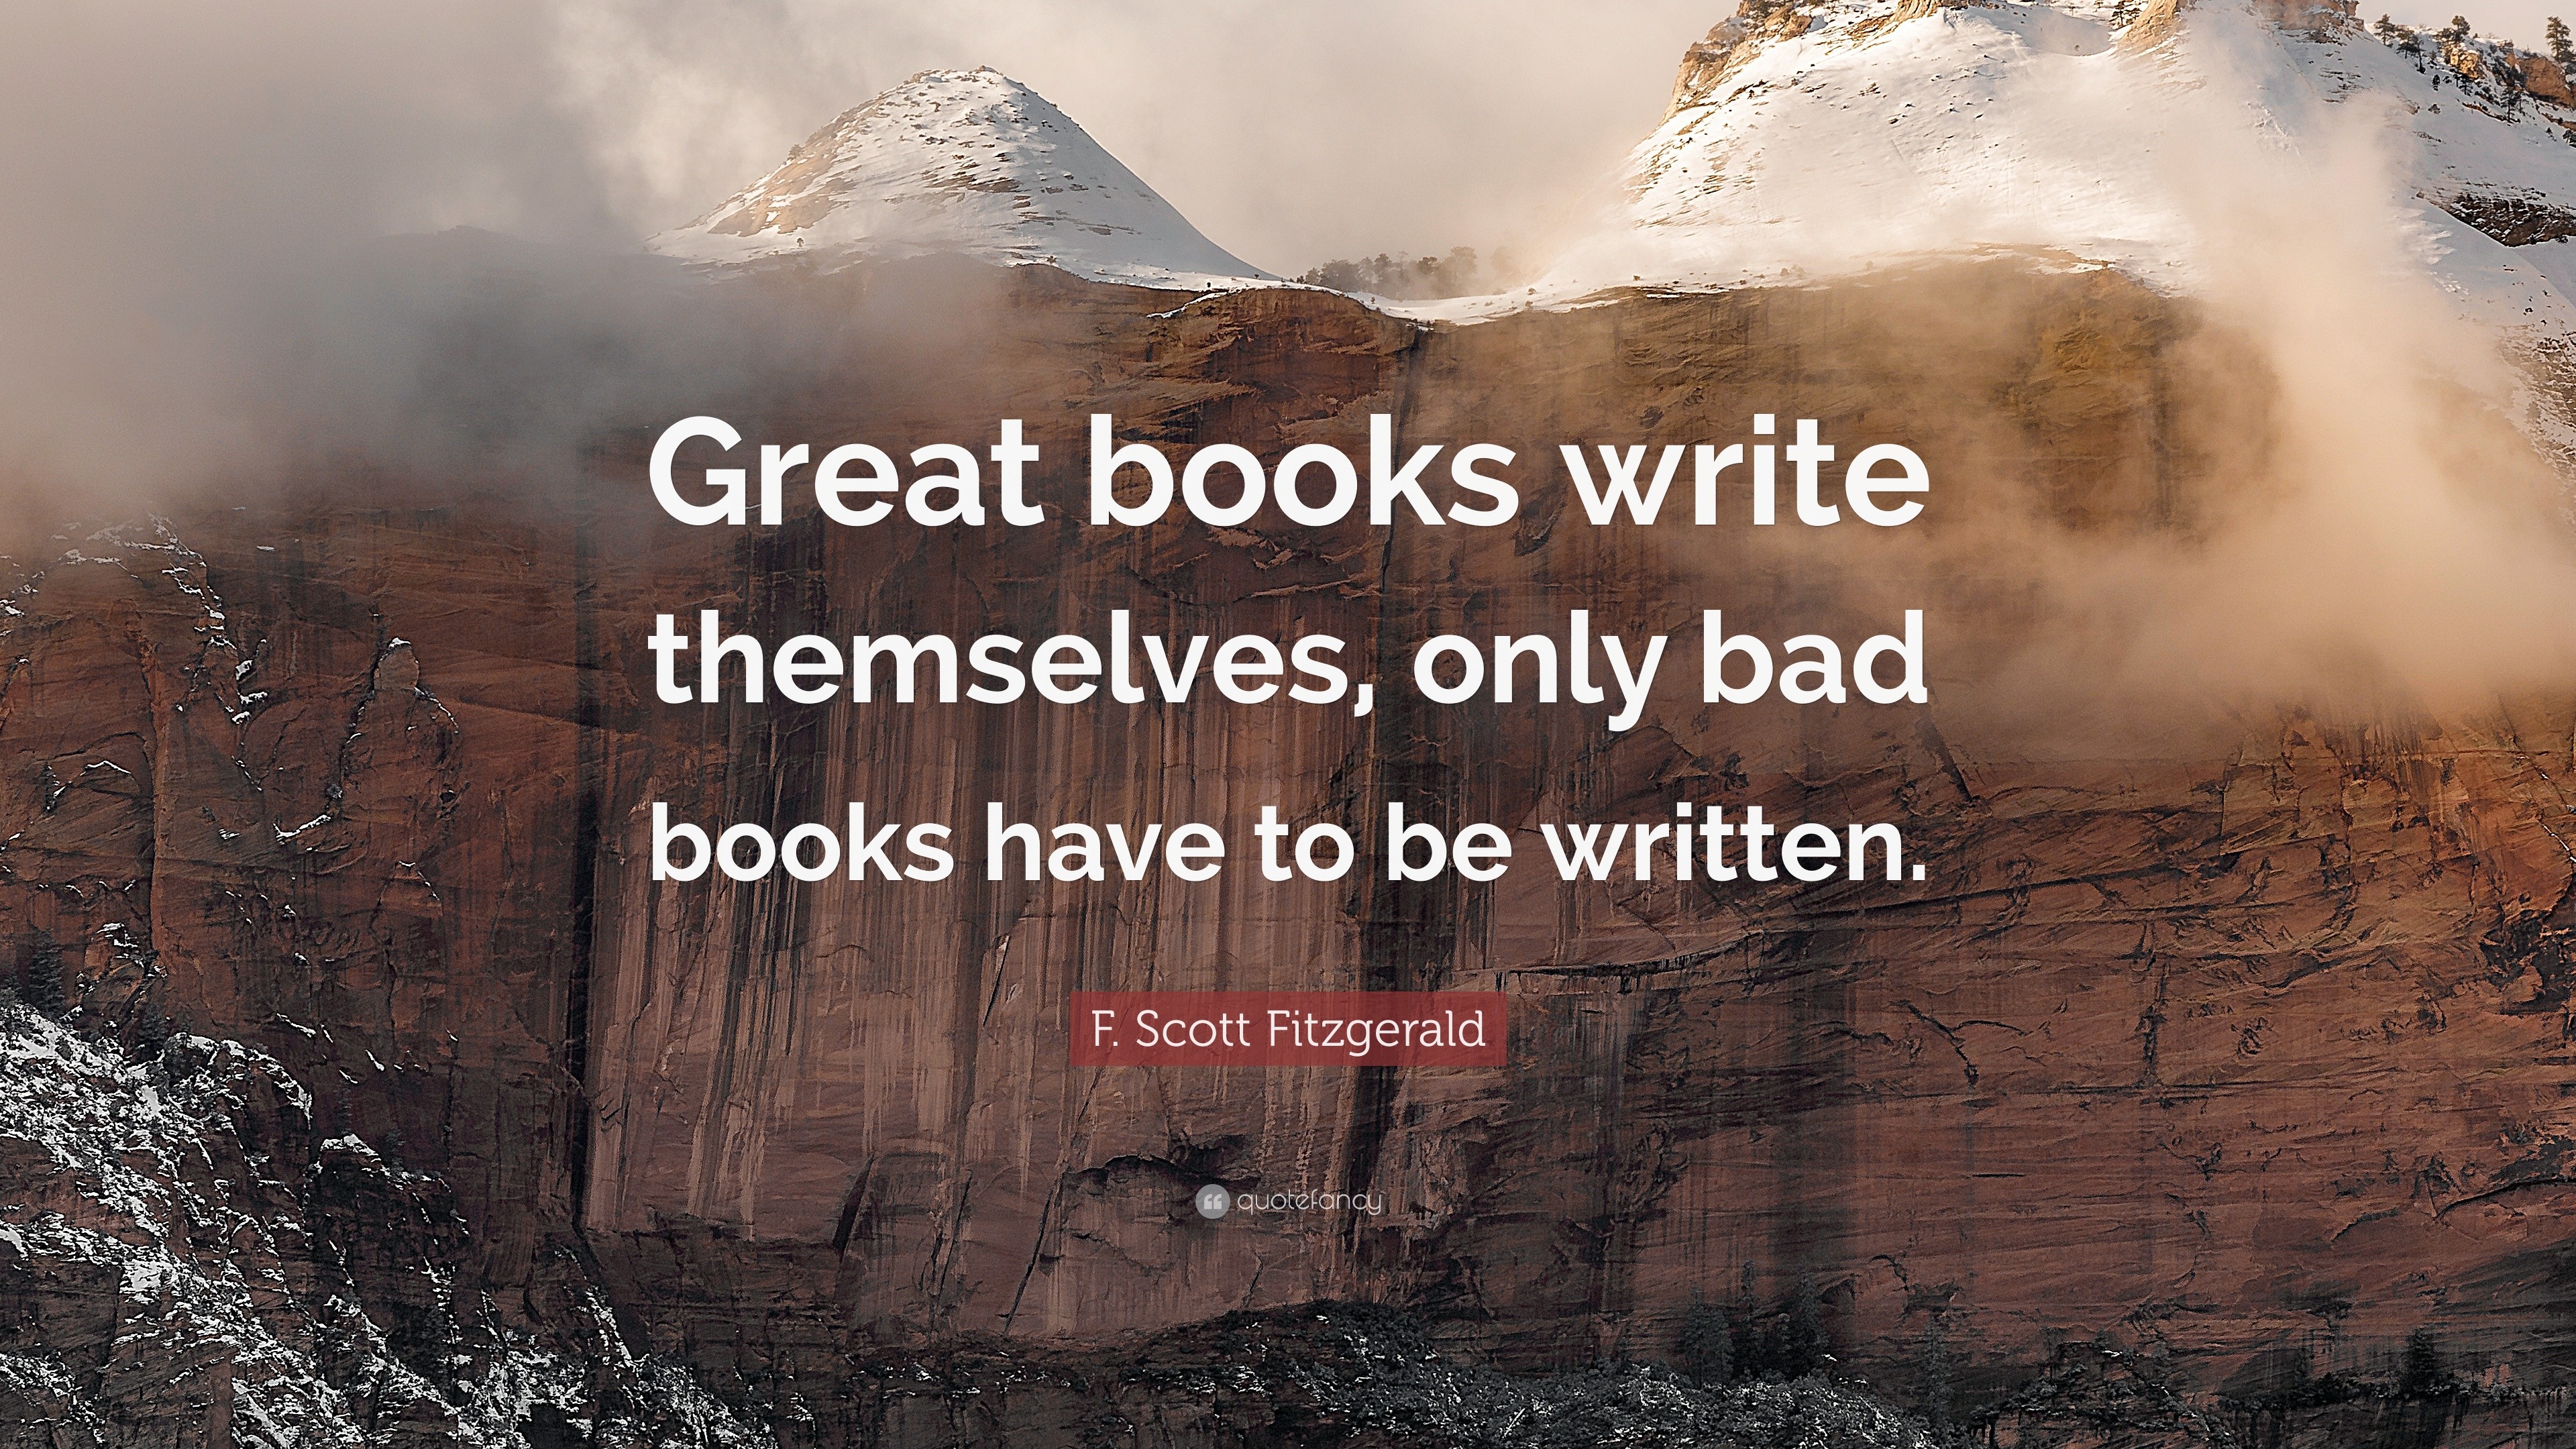 F. Scott Fitzgerald Quote “Great books write themselves